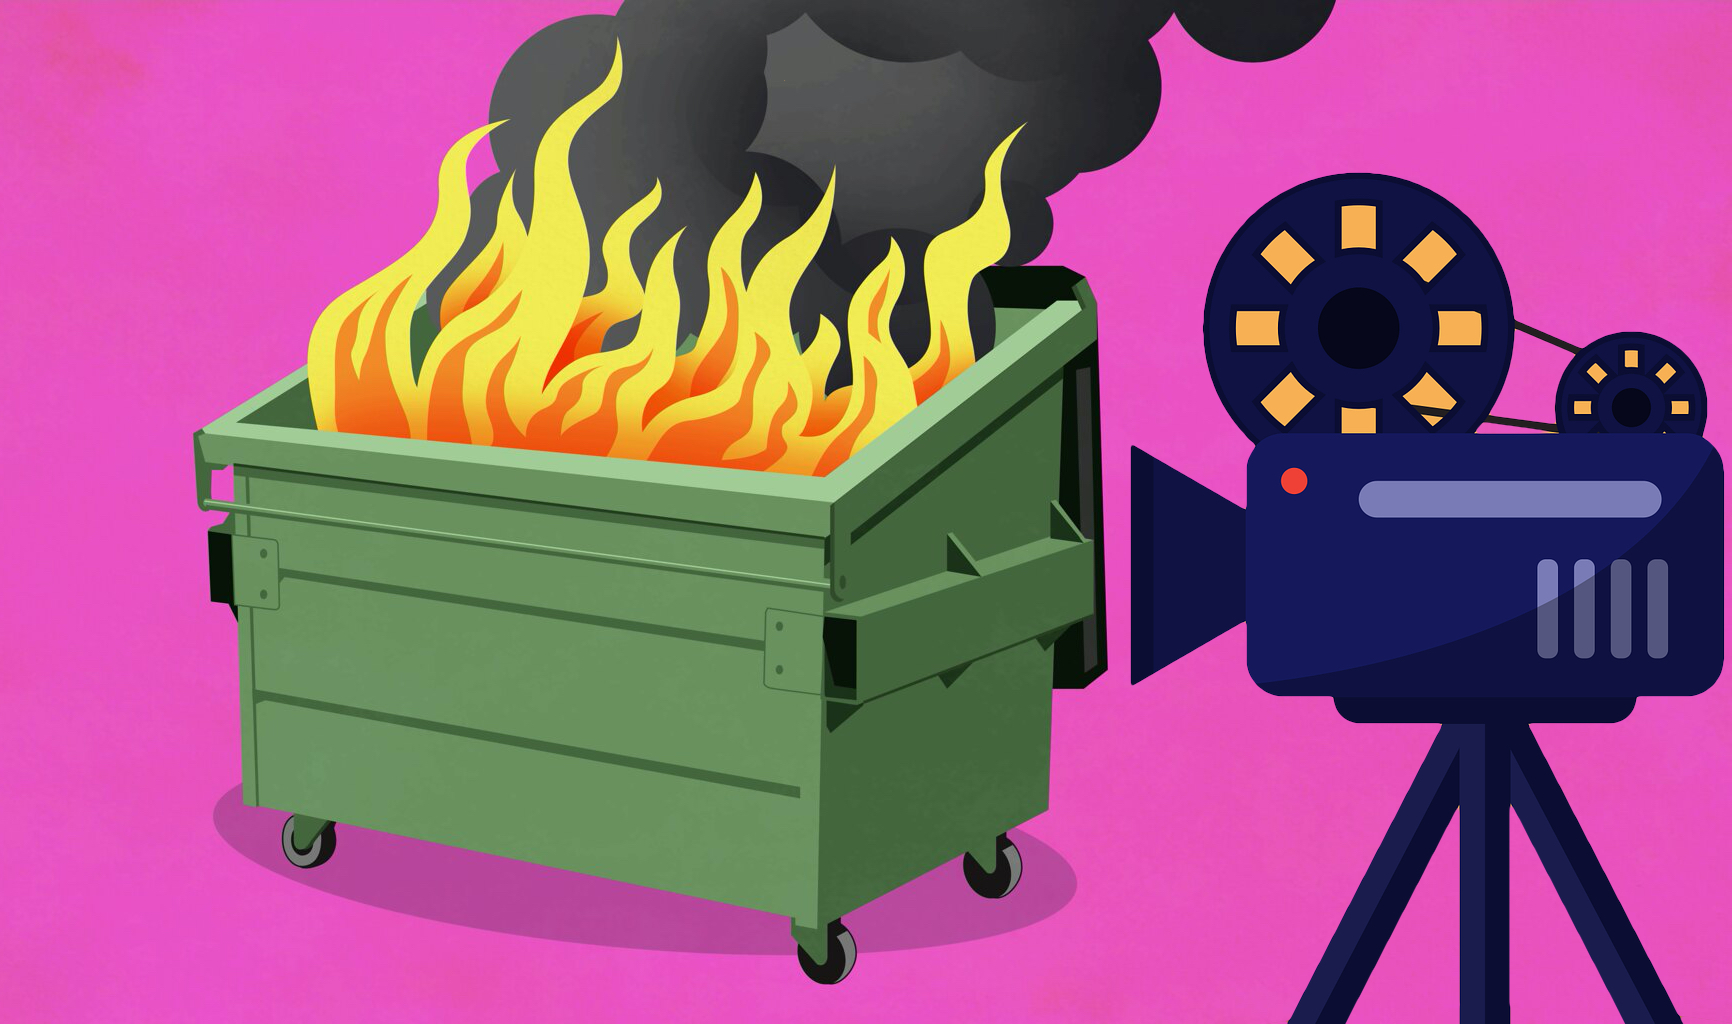 Movie camera and flaming dumpster